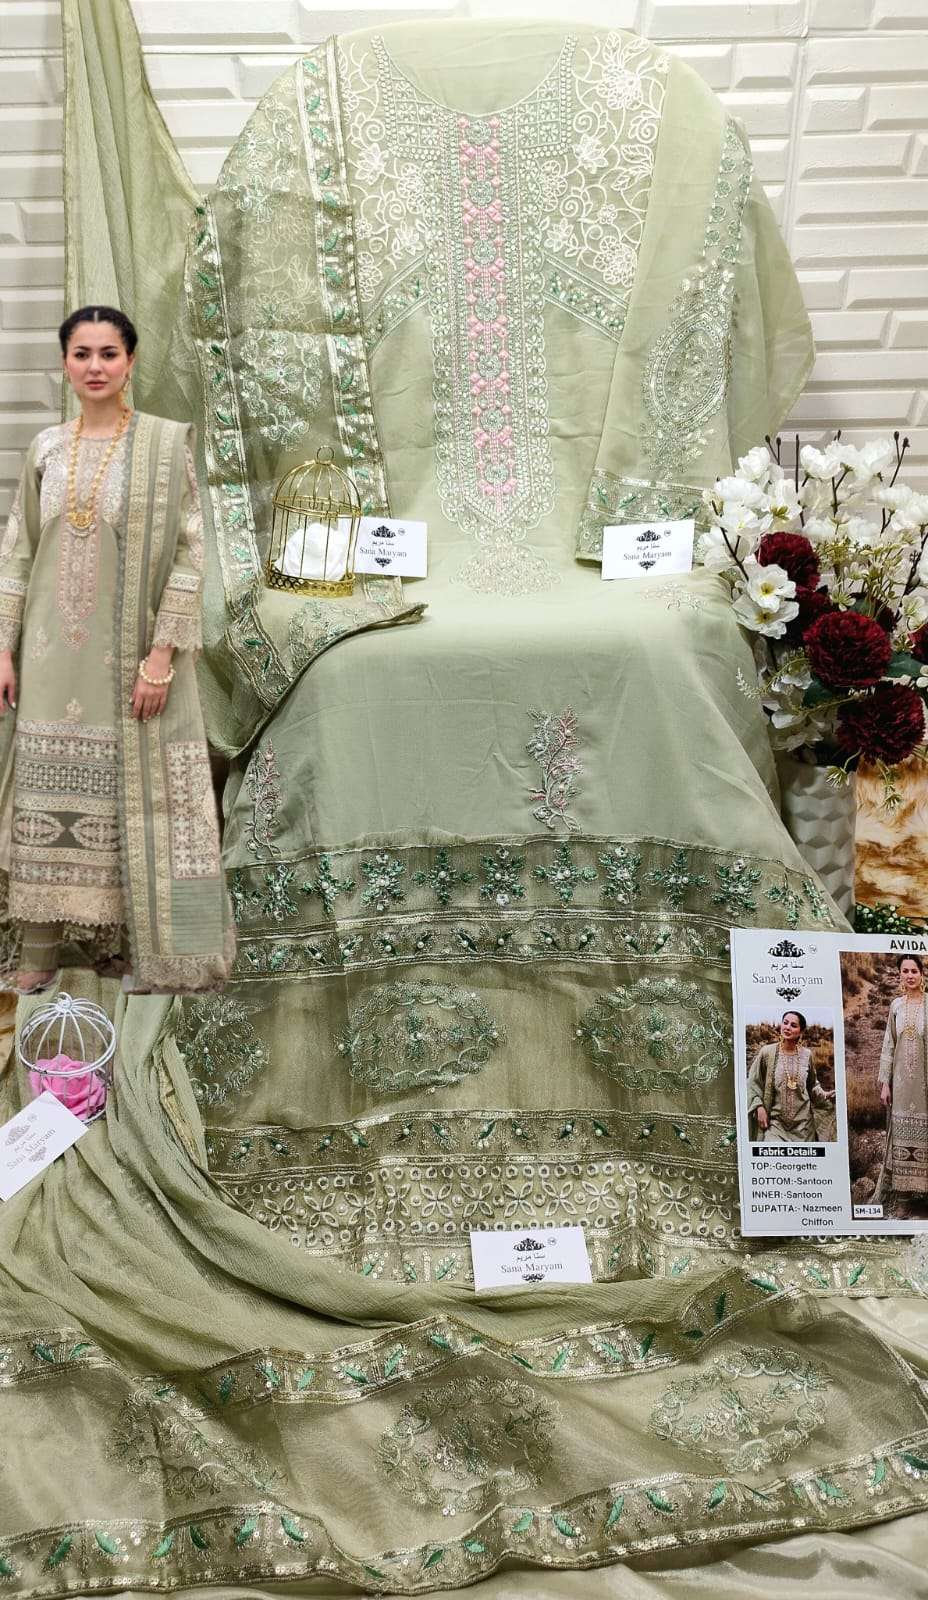 Avida By Sana Maryam Designer Pakistani Suits Beautiful Fancy Colorful Stylish Party Wear & Occasional Wear Georgette With Embroidery Dresses At Wholesale Price